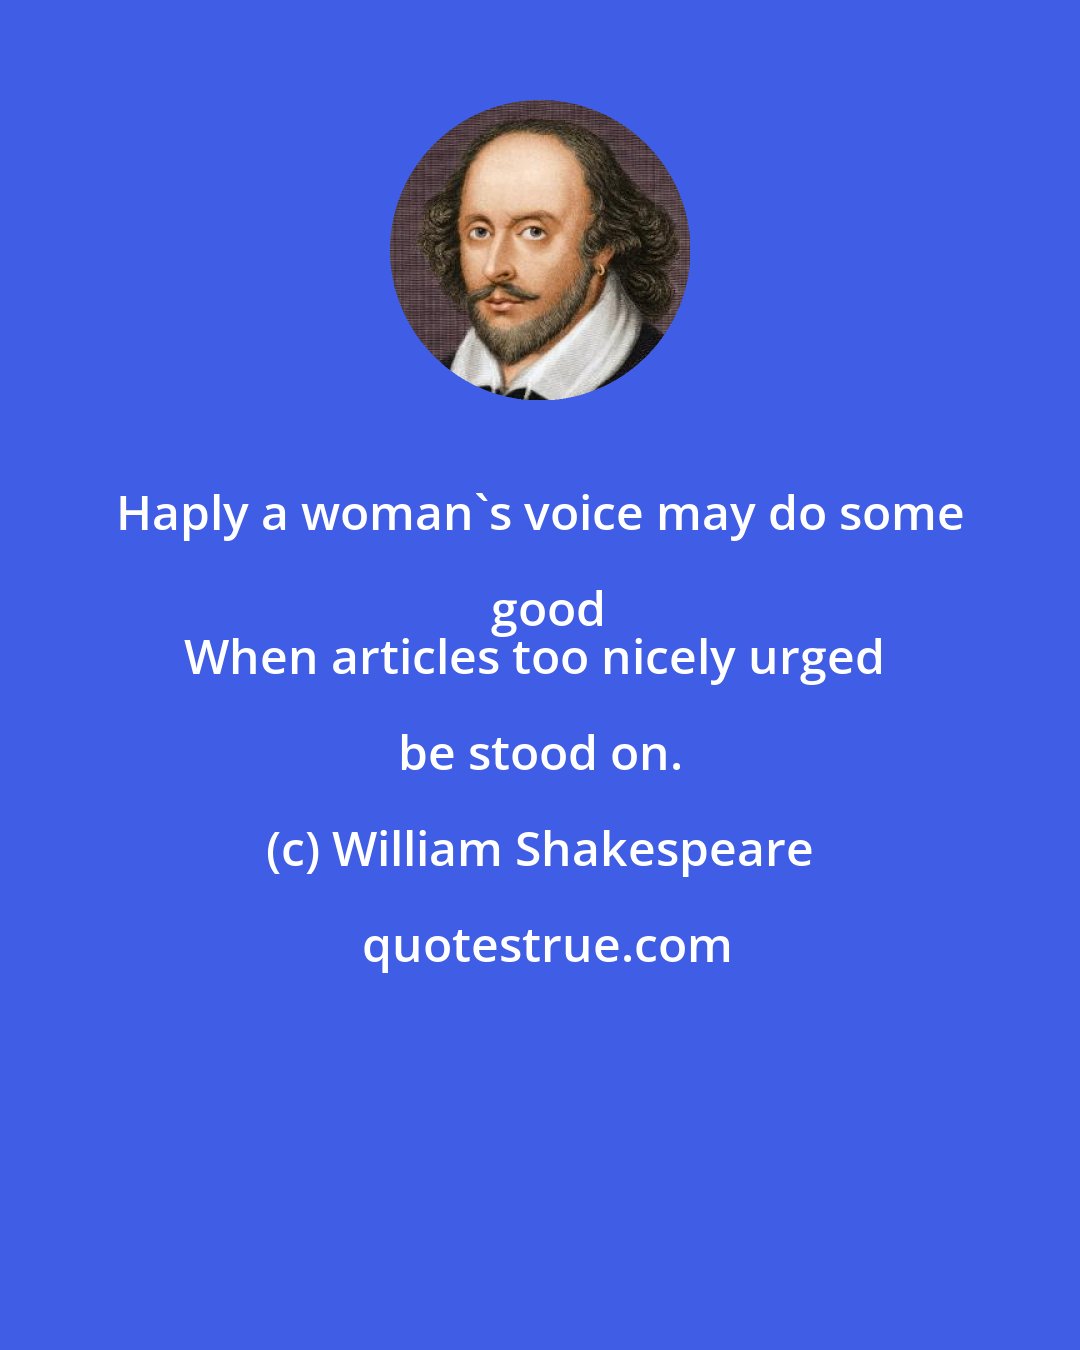 William Shakespeare: Haply a woman's voice may do some good
When articles too nicely urged be stood on.